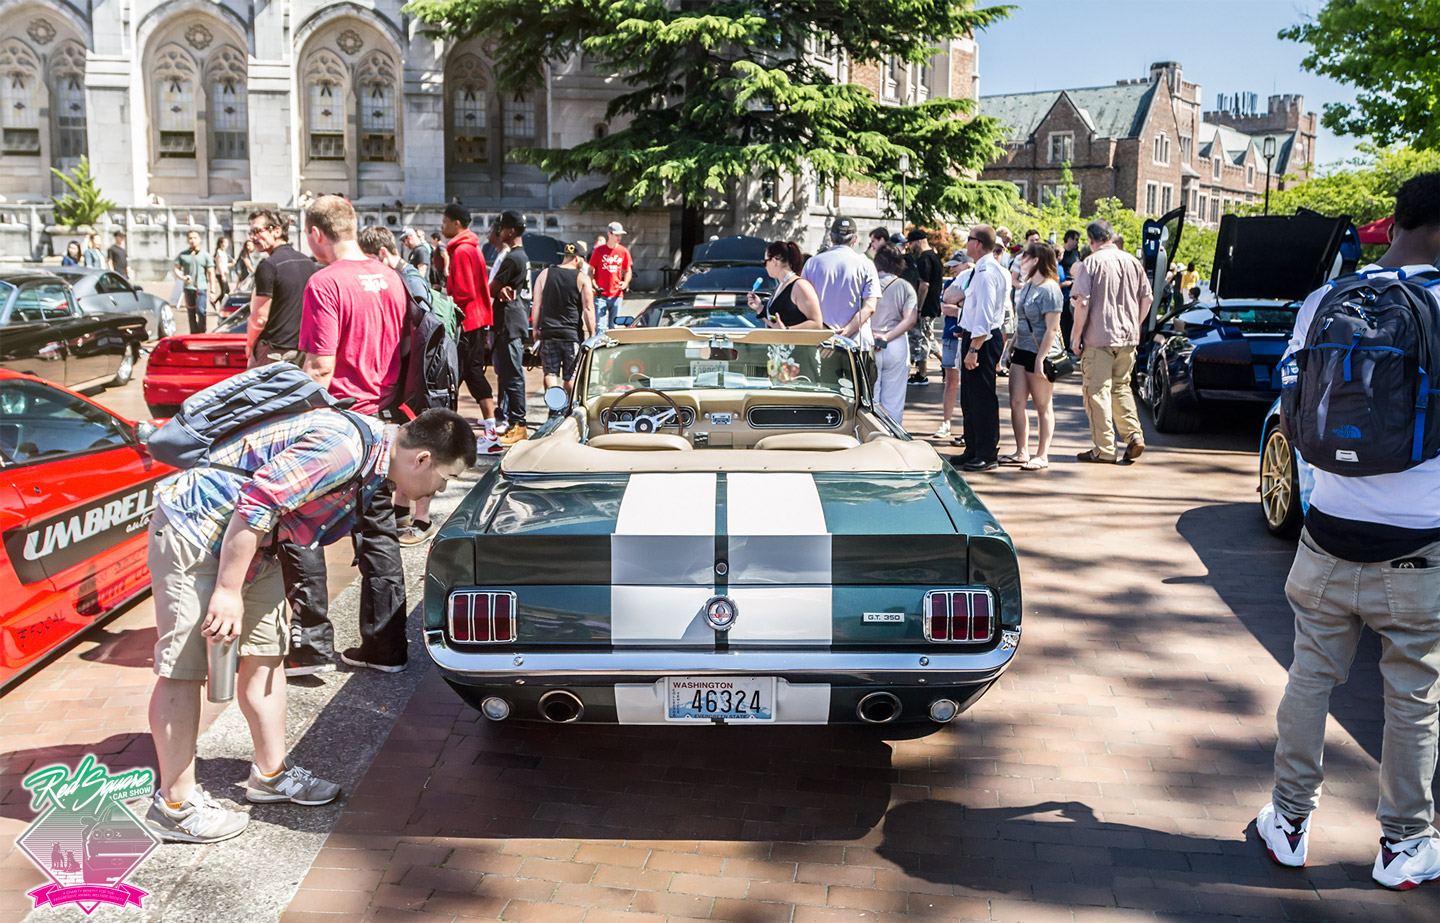 Red-Square-Car-Show-9-UW-Charity-Benefit-PAWS-org-classic-mustang-vert-s